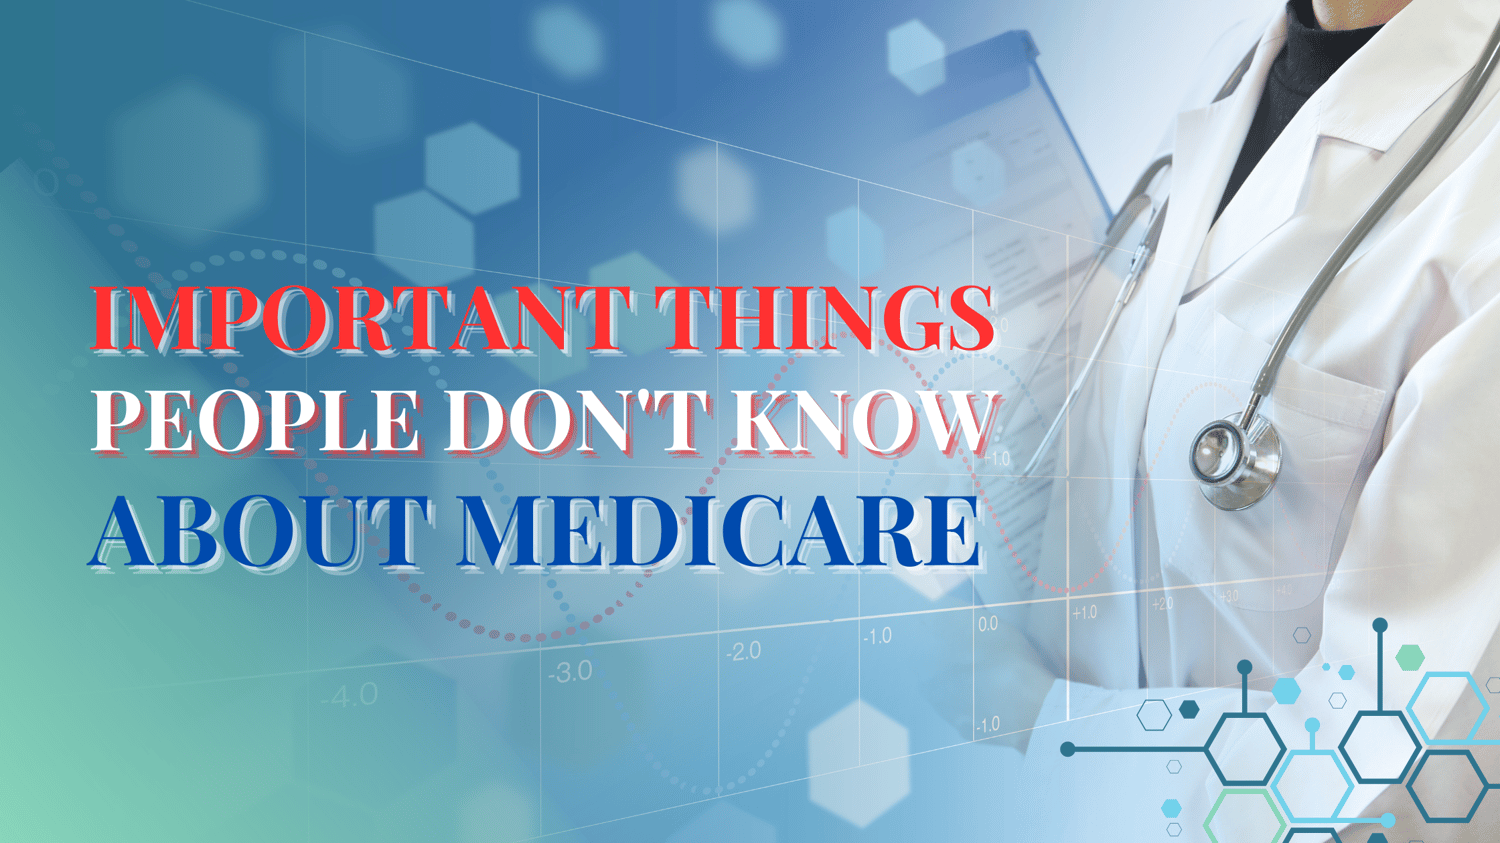 IMPORTANT THINGS PEOPLE DON'T KNOW ABOUT MEDICARE